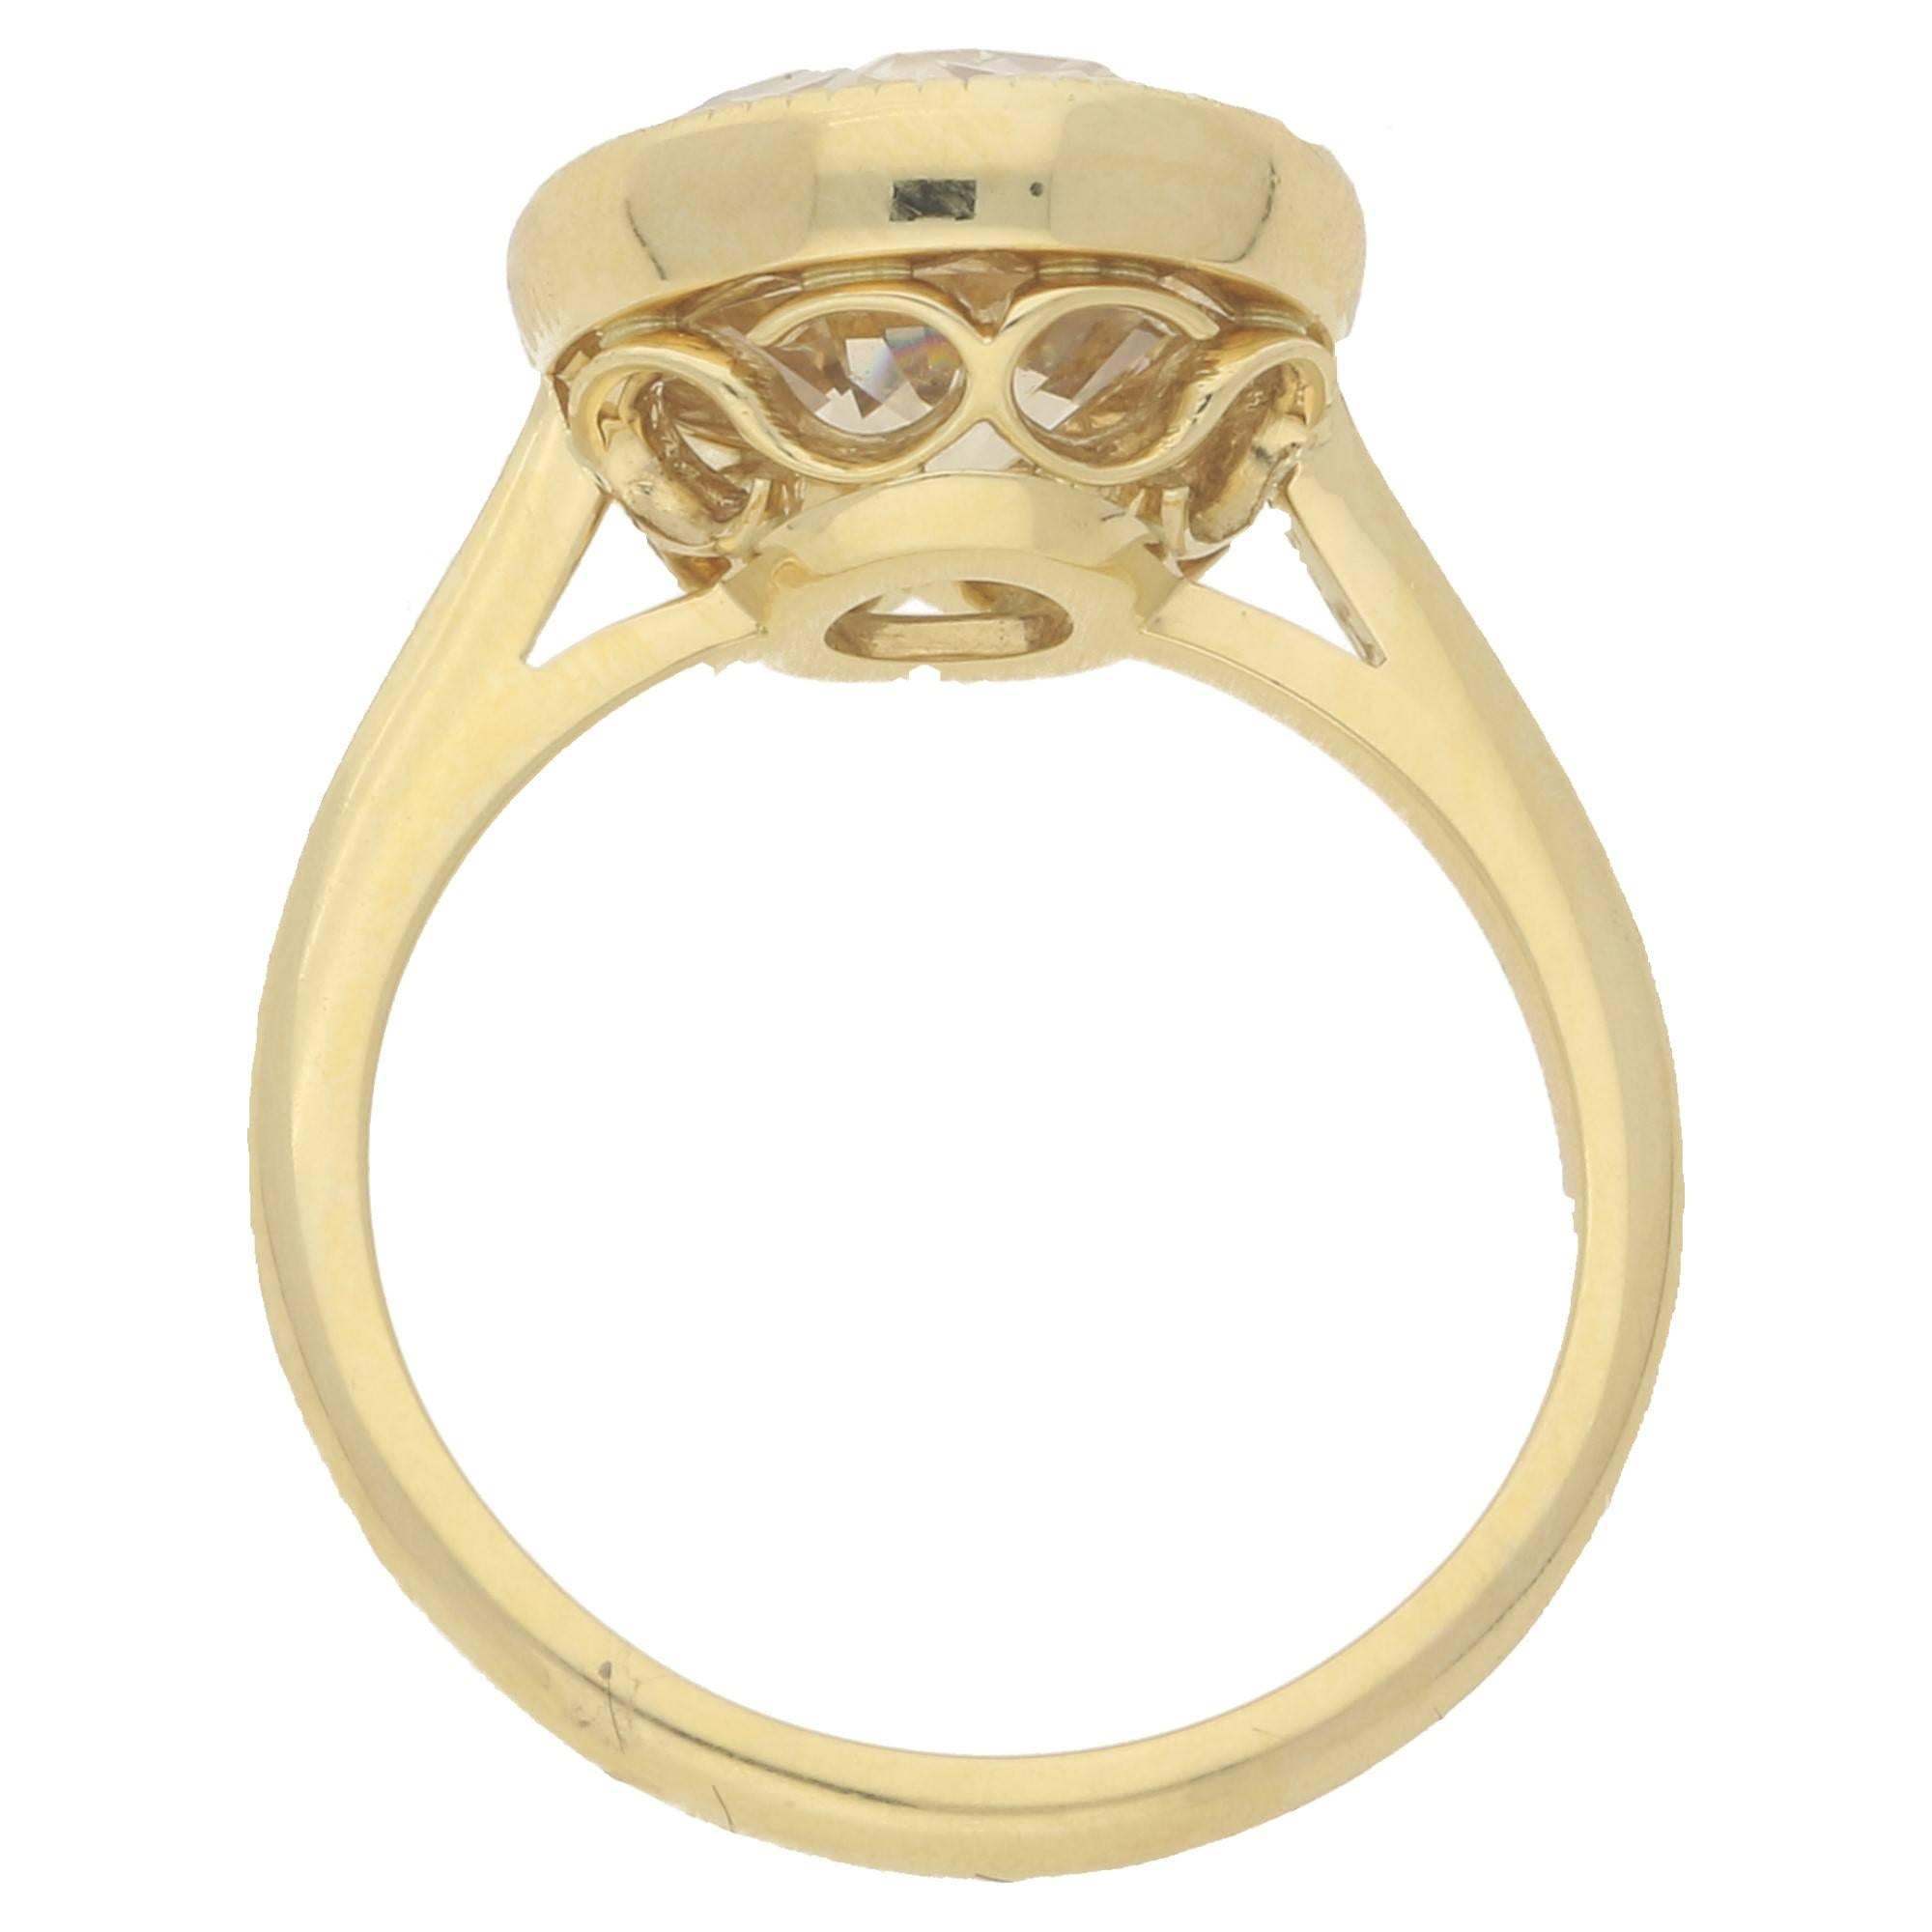 A modern 18ct yellow gold solitaire ring, featuring a round re-faceted Old European cut diamond estimated as 4.46cts, K/L colour and Si clarity set in a rubover setting with millegrain detailing and an openwork handmade setting underneath to a